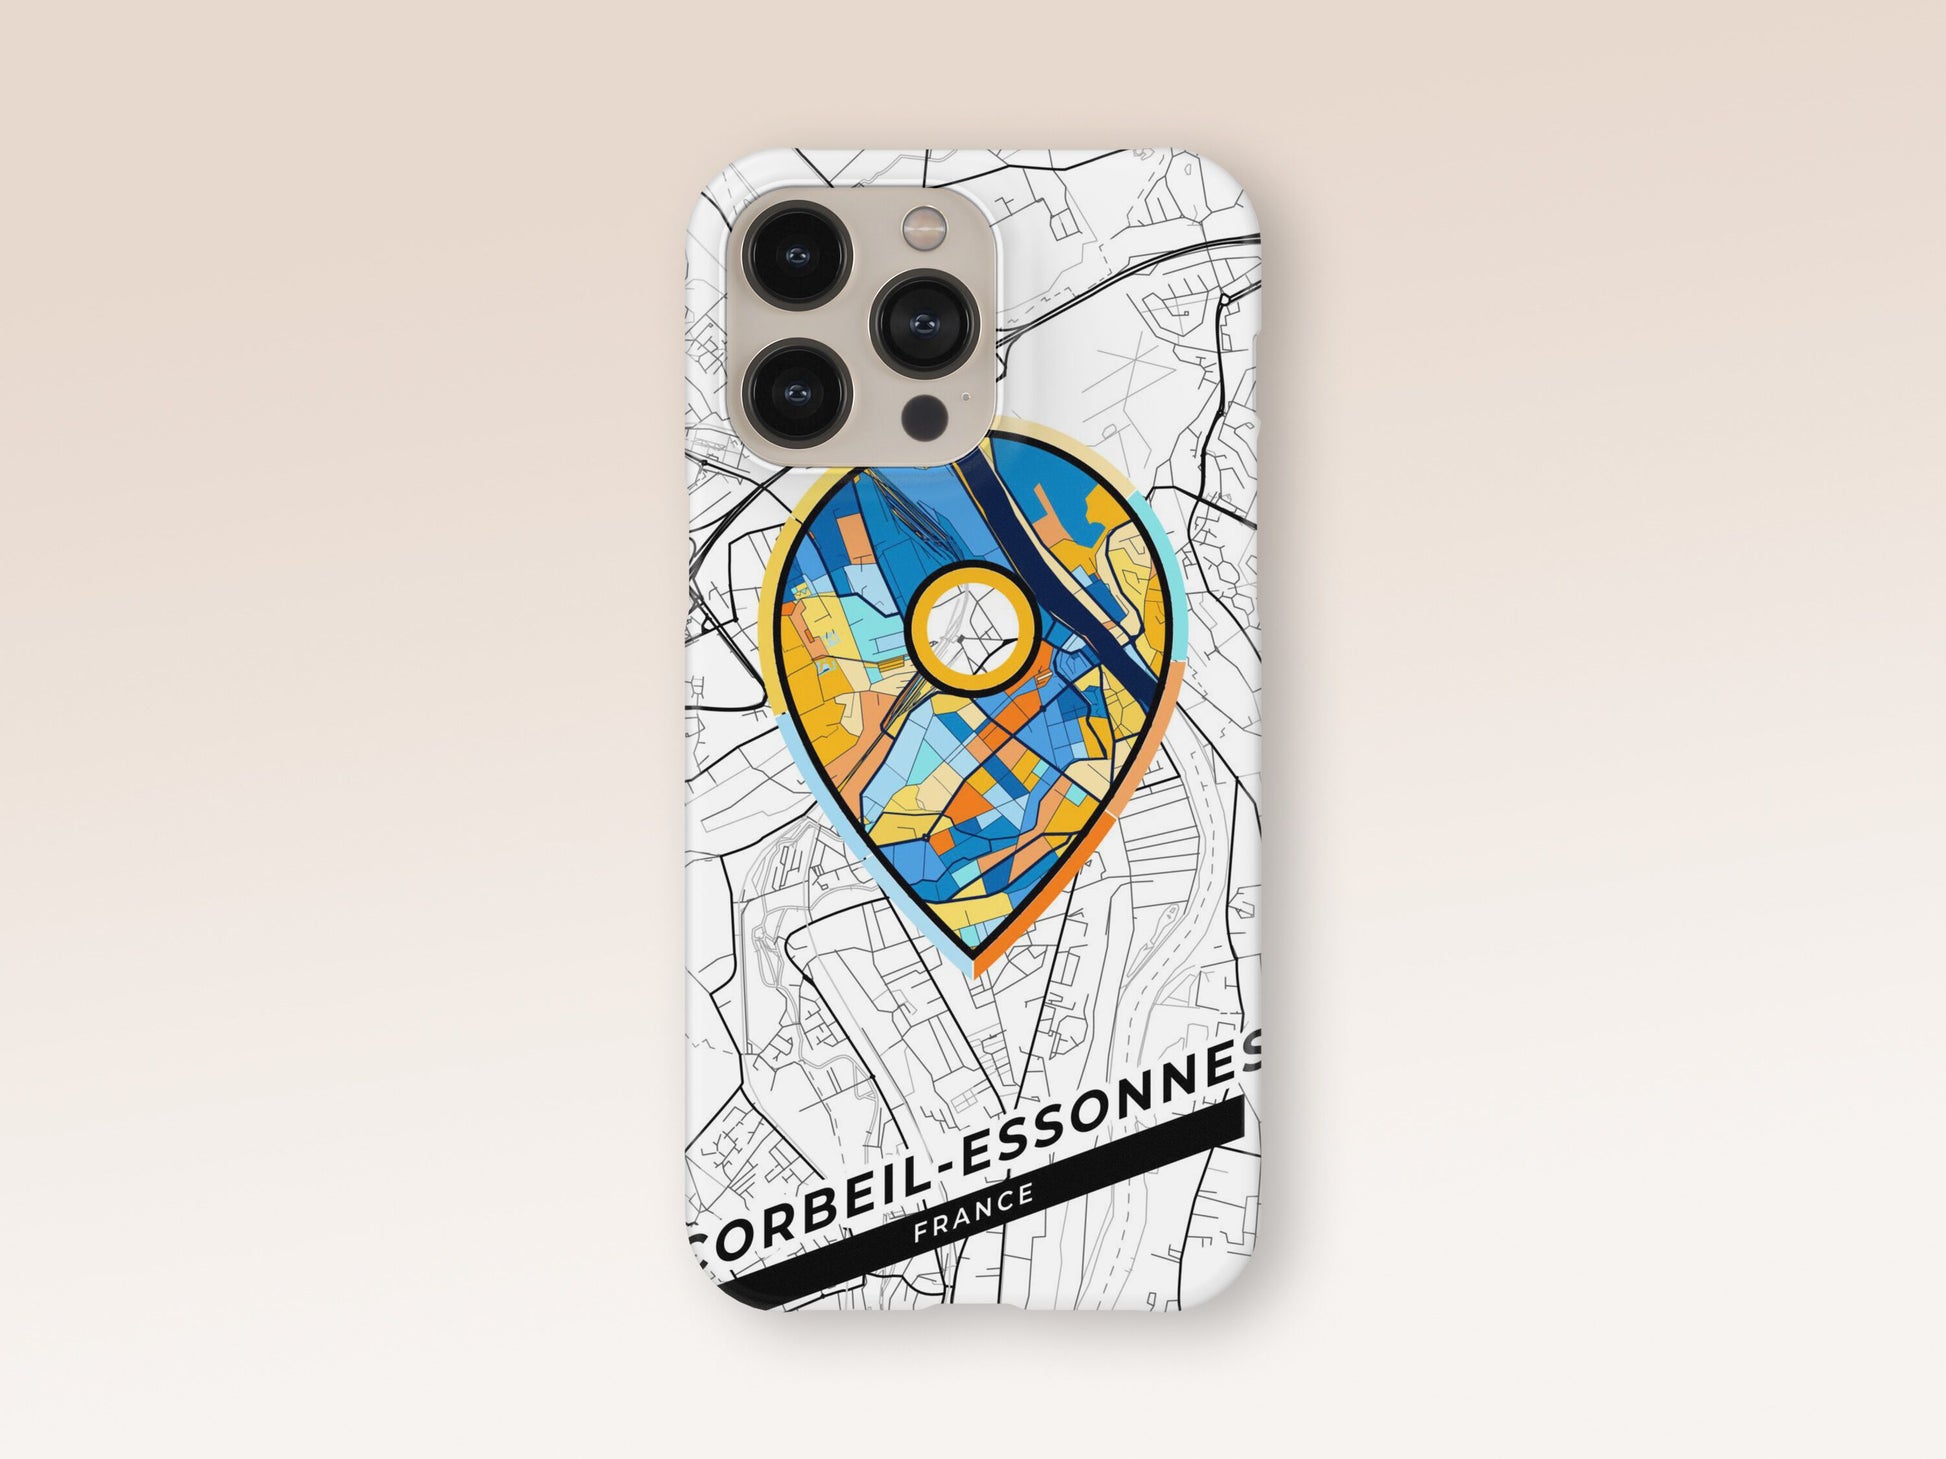 Corbeil-Essonnes France slim phone case with colorful icon. Birthday, wedding or housewarming gift. Couple match cases. 1